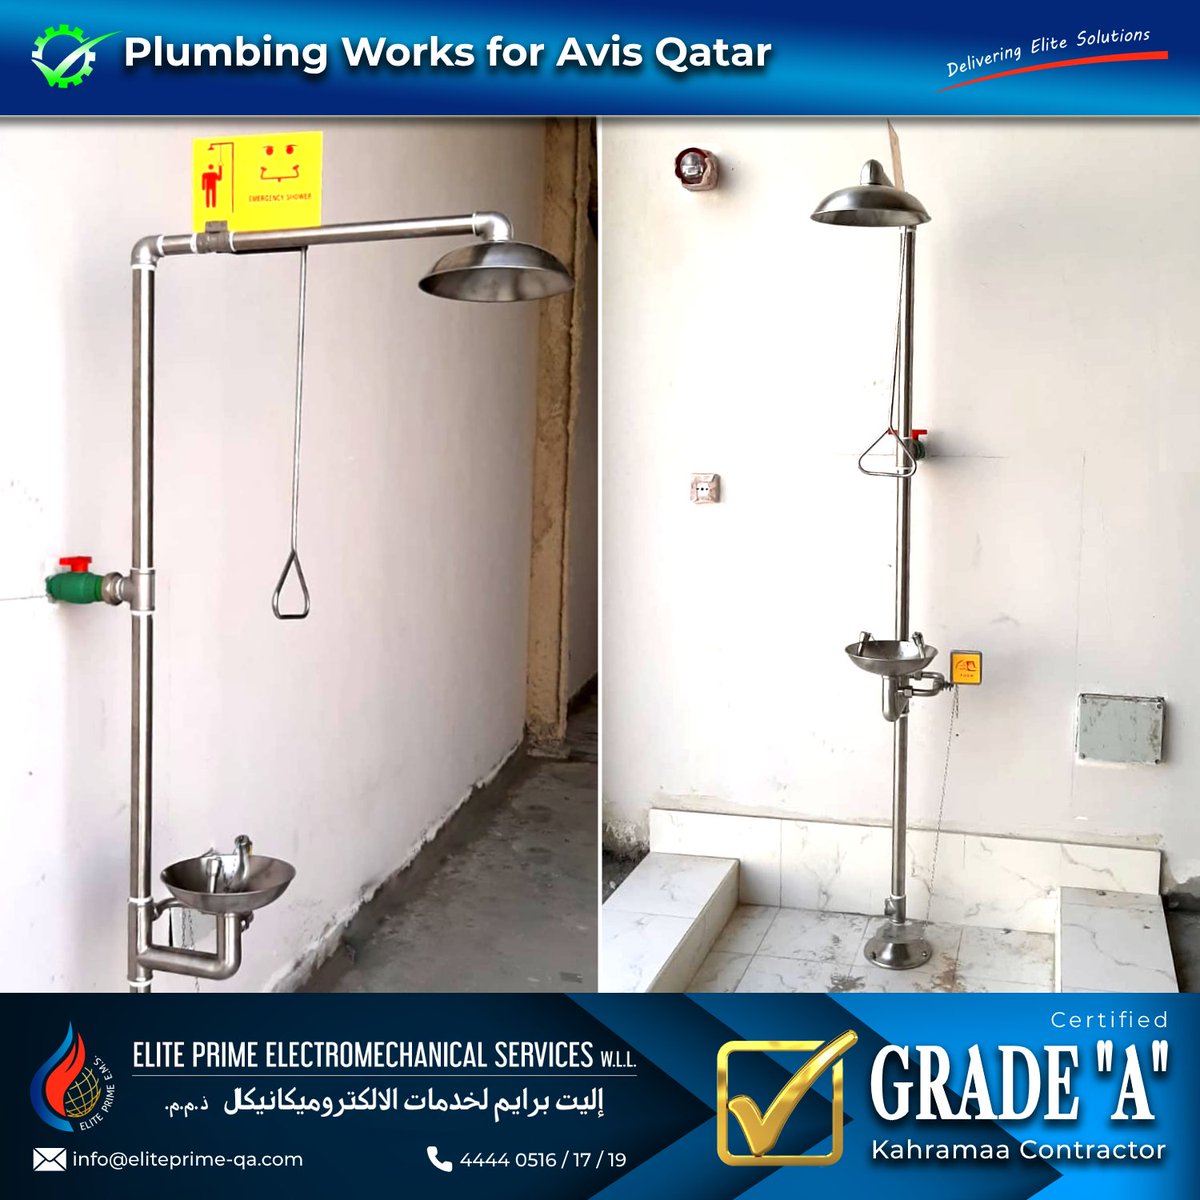 Plumbing works for our valued client Avis Qatar. For plumbing requirements, please don't hesitate to contact us at 4444 0516 or email at info@eliteprime-qa.com #DeliveringELITESolutions #Qatar #MEP #QatarProjects #Plumbing #engineering